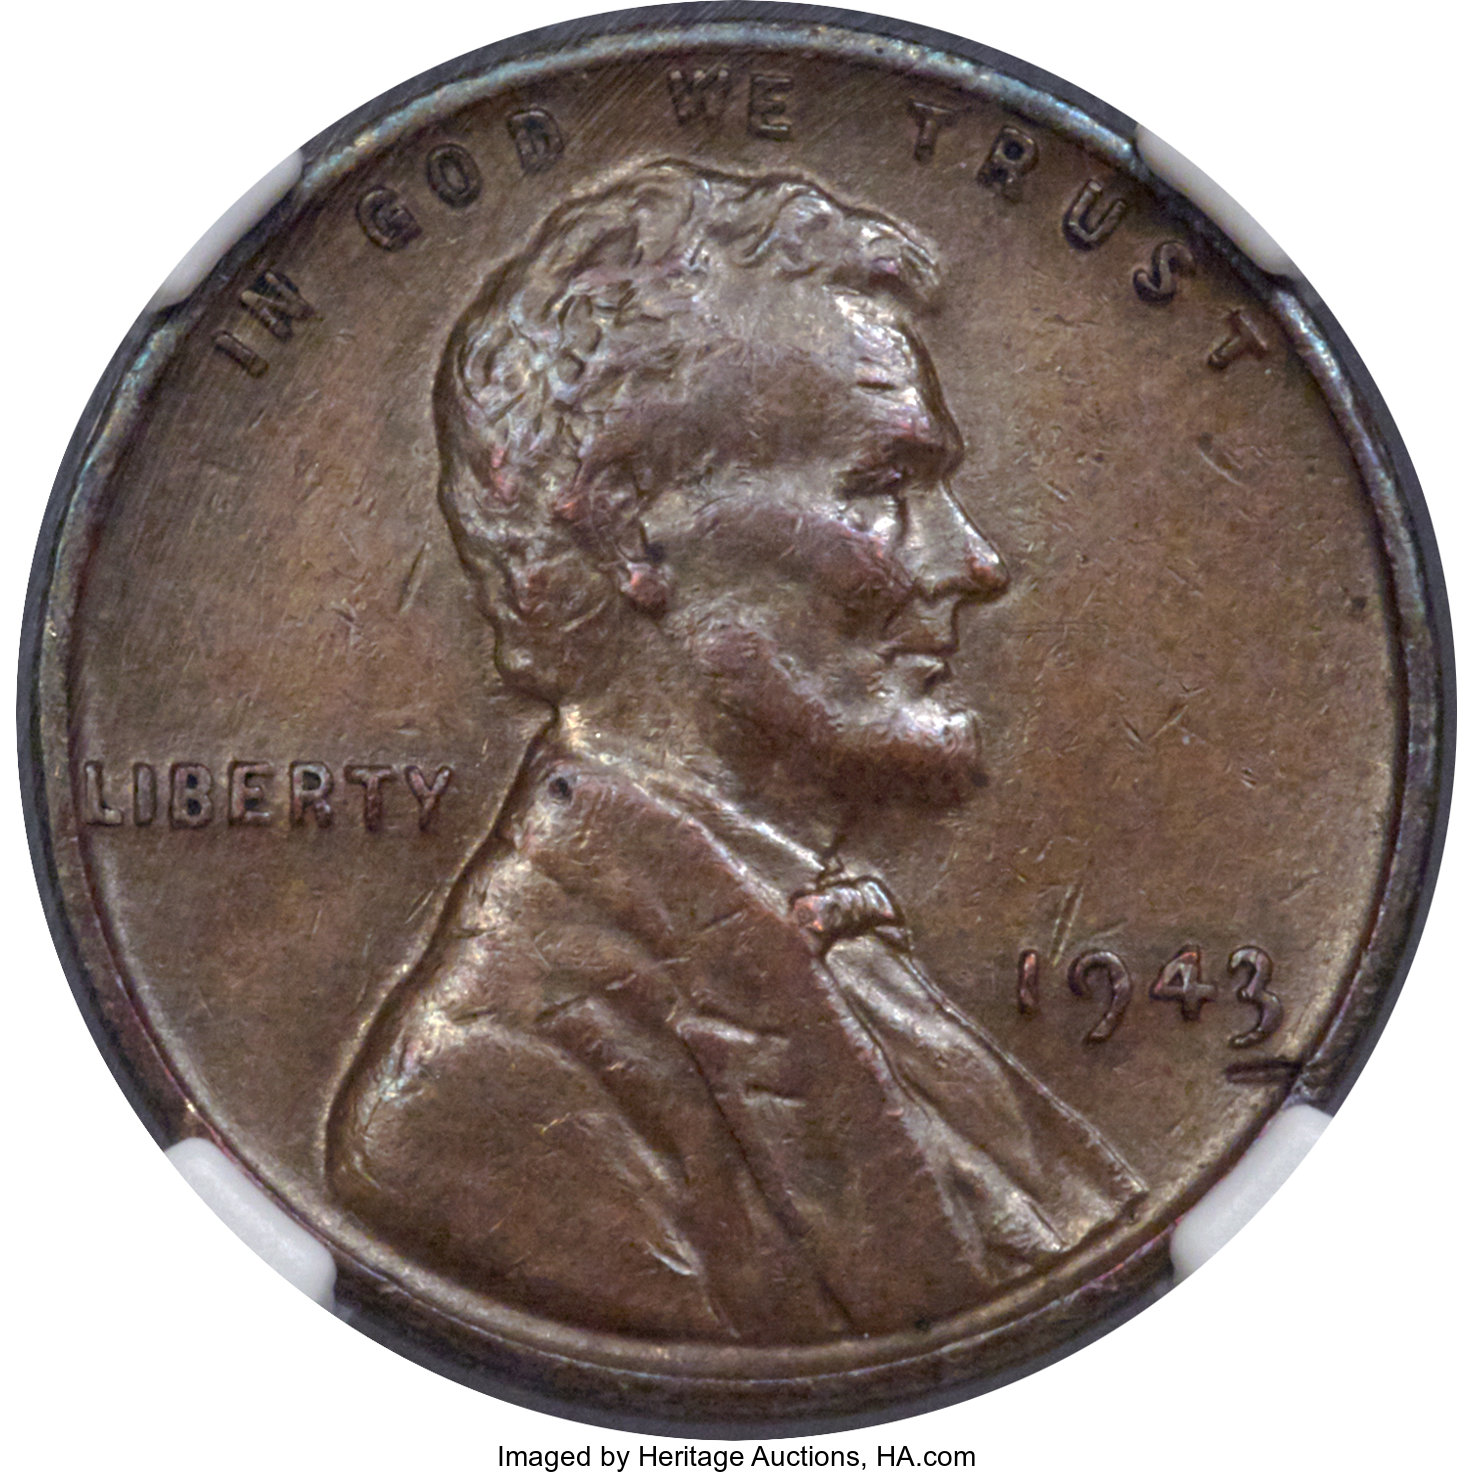 enlarged image for Media Error Draws Misleading Reports on Sale of 1943 Bronze Lincoln Cent